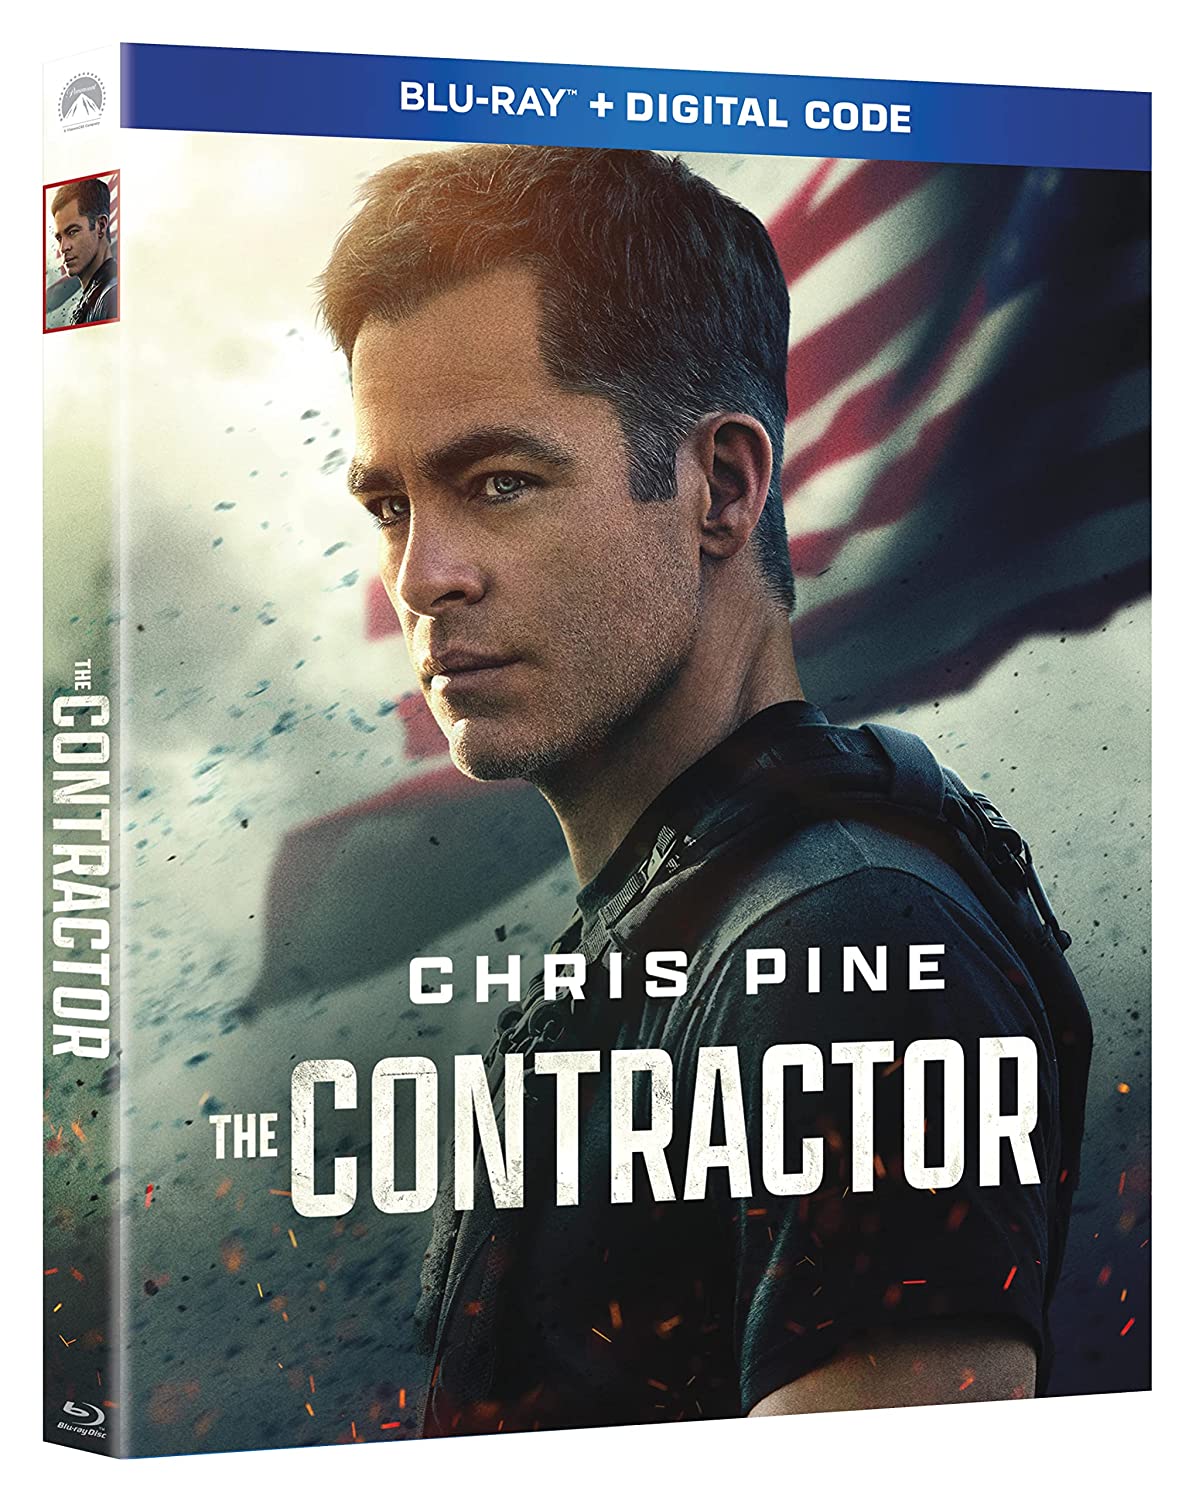 The Contractor Blu-ray